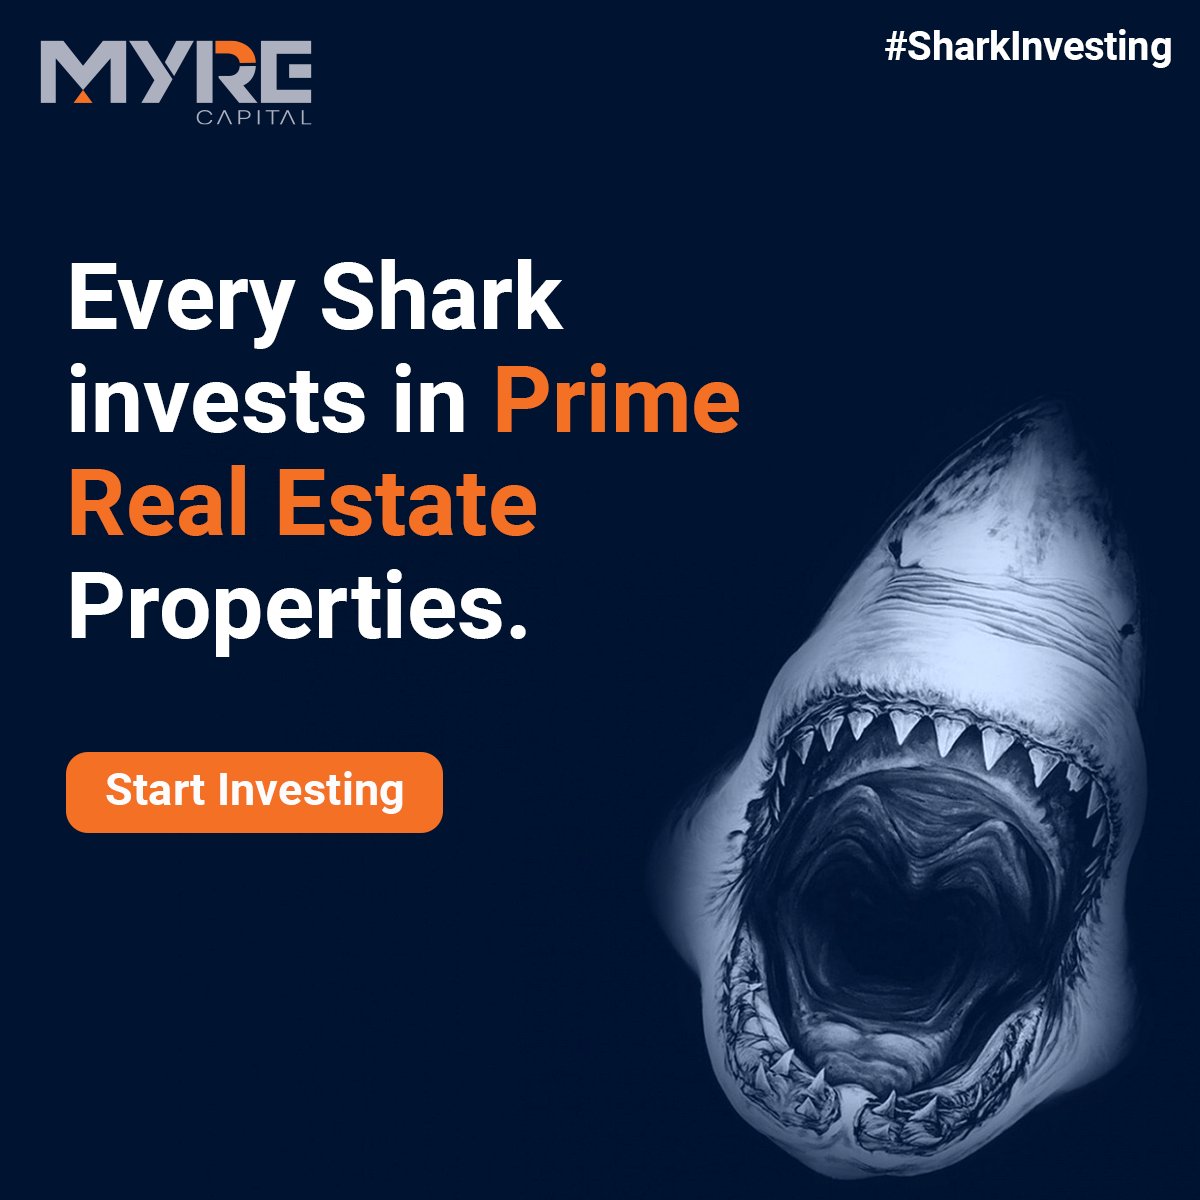 #CampaignSpotlight: “Who says you can't be a Shark? Sharks are sharks because they invest Smart!”

Our #SharkInvesting campaign is featured on AdGully, one of the top A&M publishing companies in India. 

Click to see: bit.ly/3YbAxVW 

#MomentMarketing #AdGully #CRE #grow